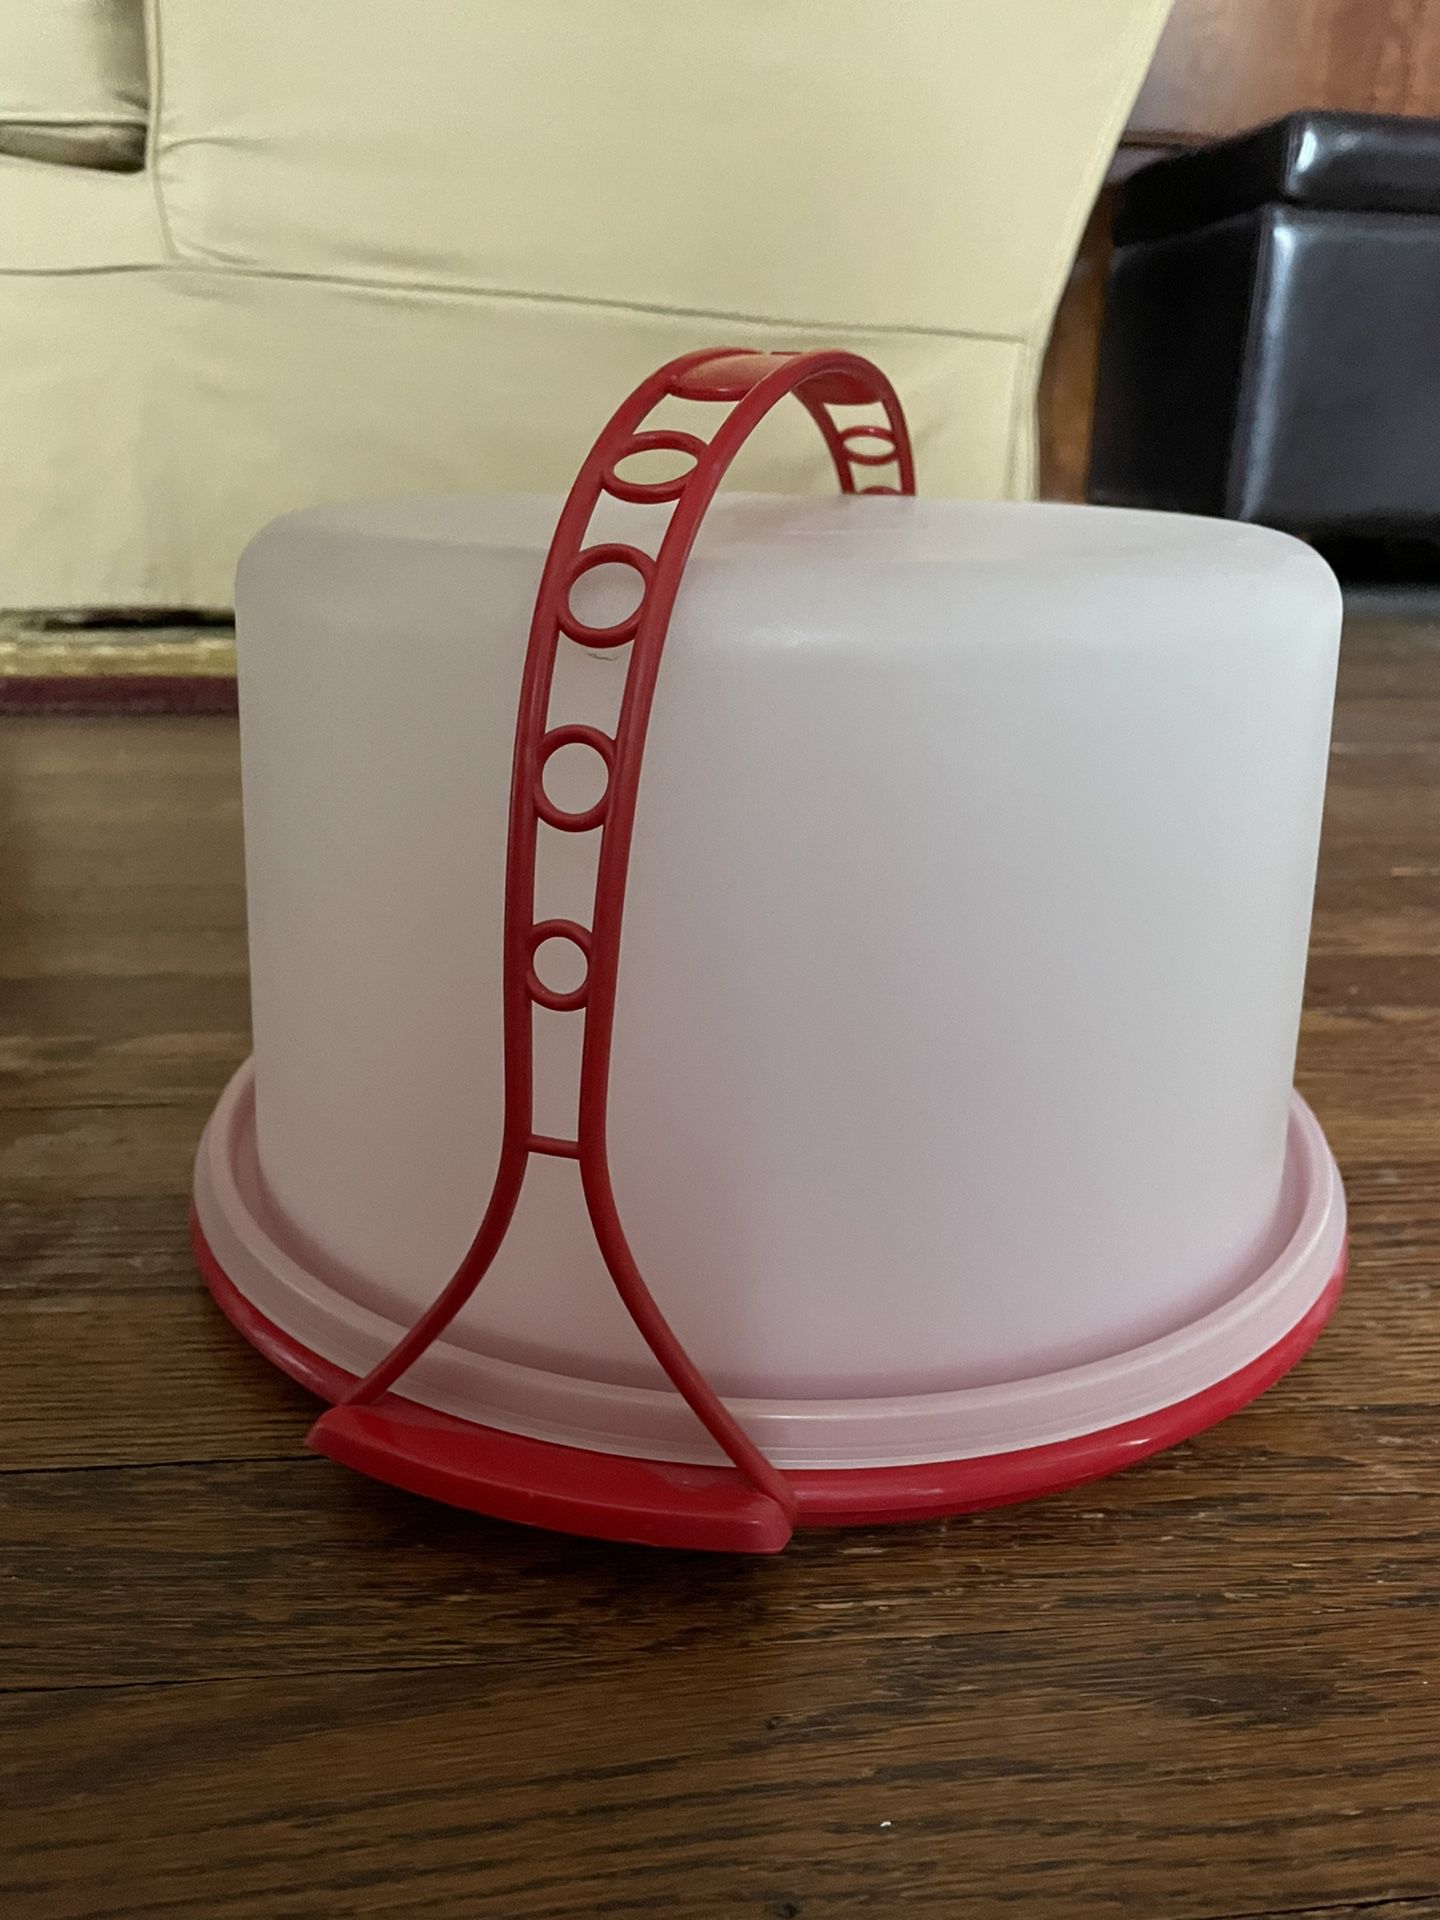 TUPPERWARE CAKE CARRIER (RED) for Sale in Foxcroft Square, PA - OfferUp